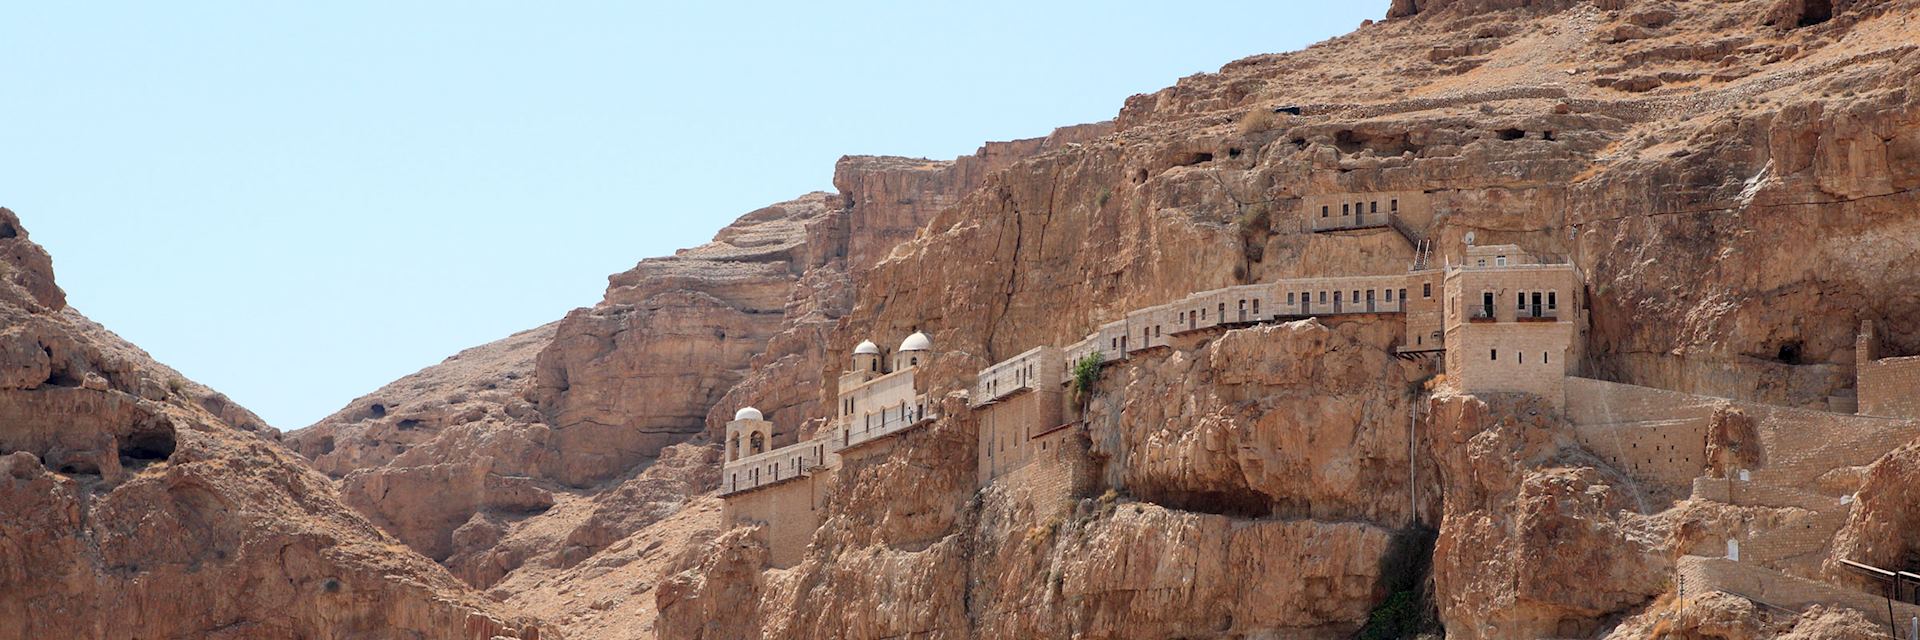 Monastery of the Temptation in Jericho